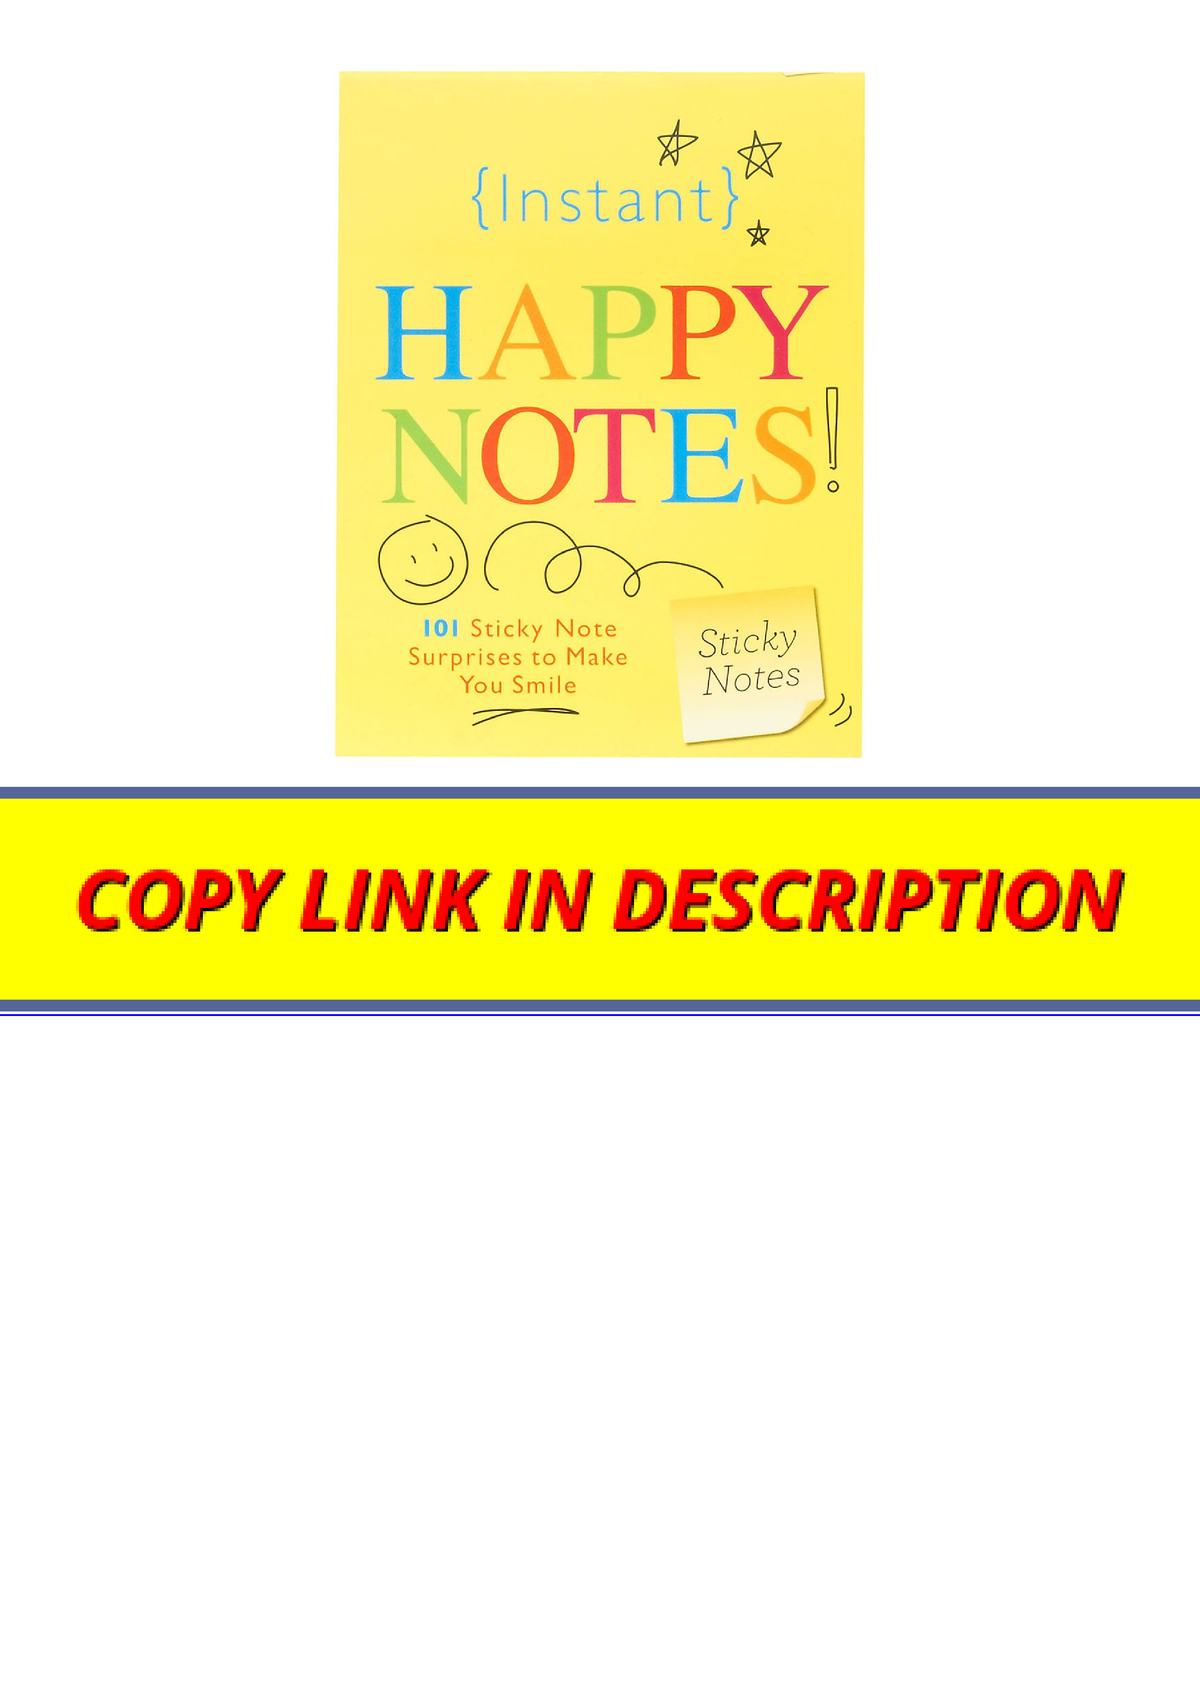 Download Instant Happy Notes 101 Cute Sticky Notes To Make Anyone Smile